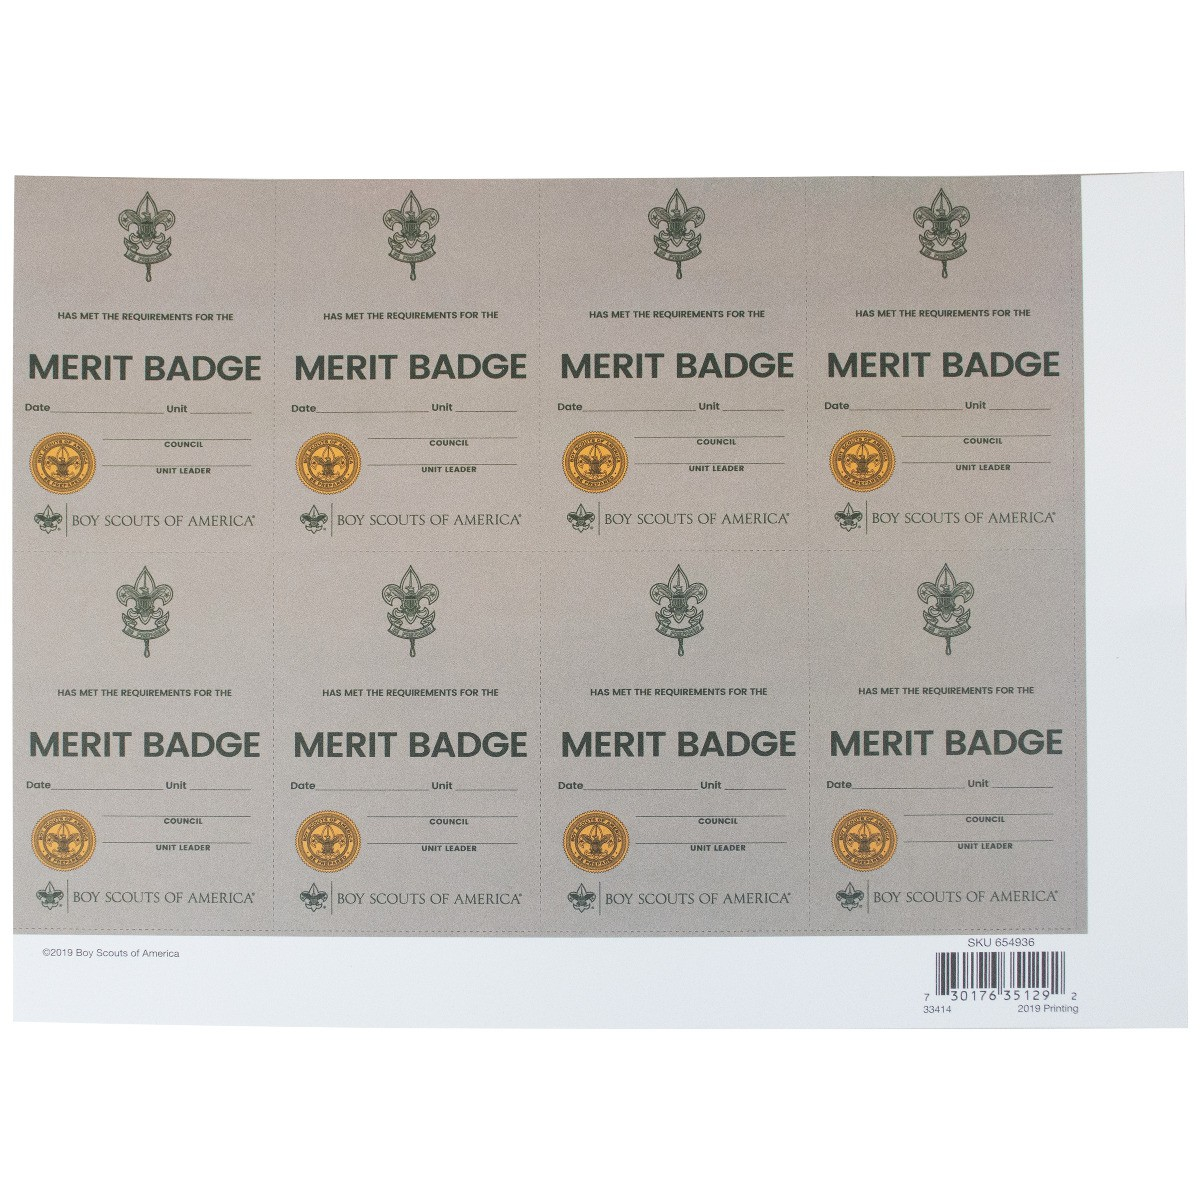 CLEAR PLASTIC BACK BOY SCOUT Y738 PERSONAL FINANCE TYPE H MERIT BADGE 